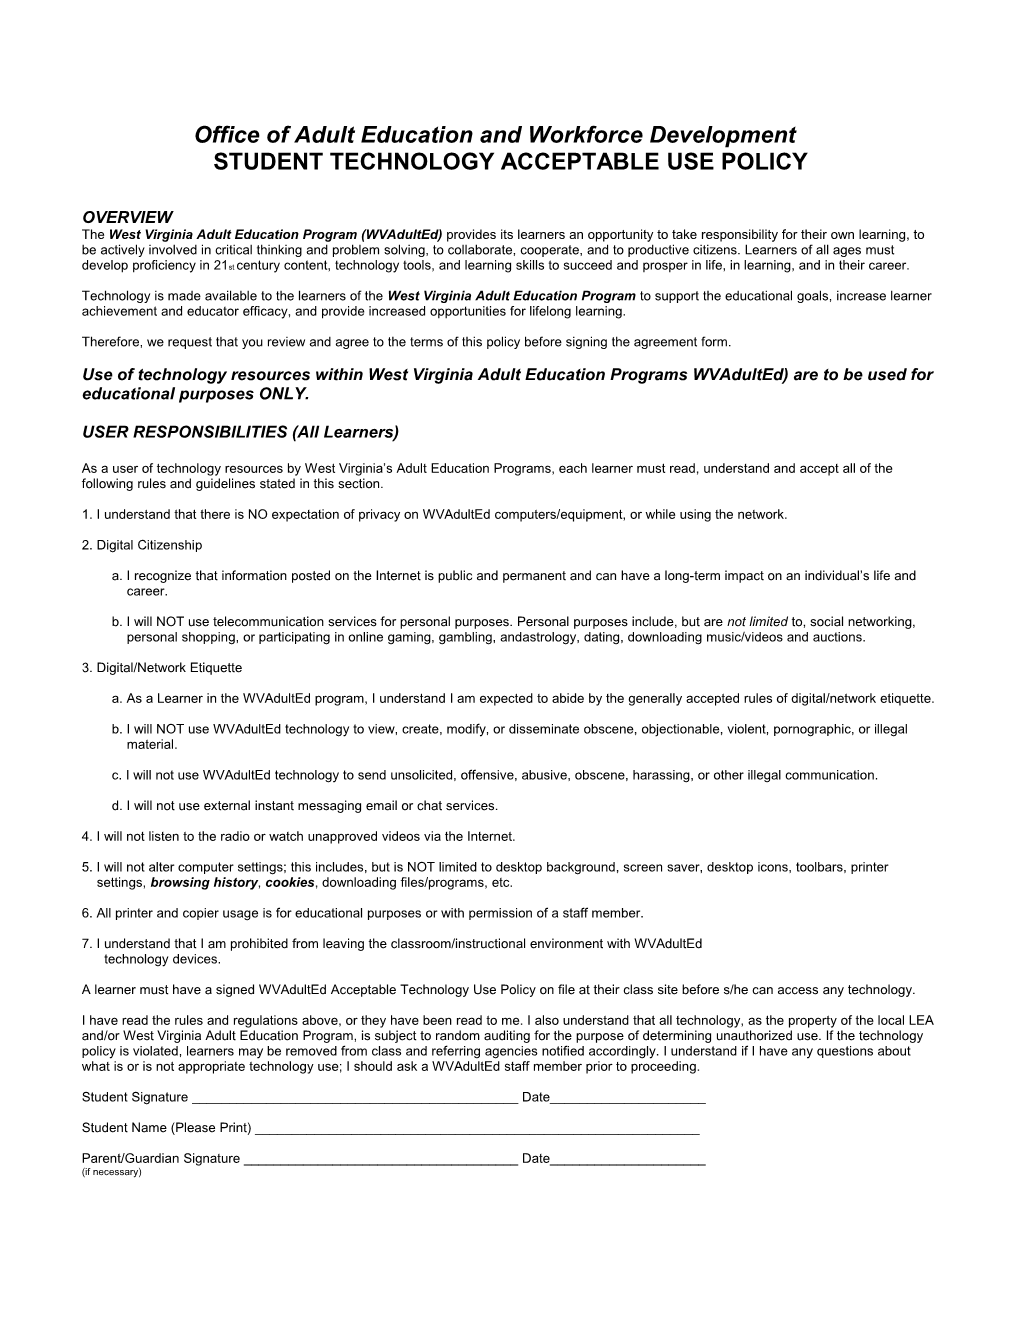 Student Technology Acceptable Use Policy